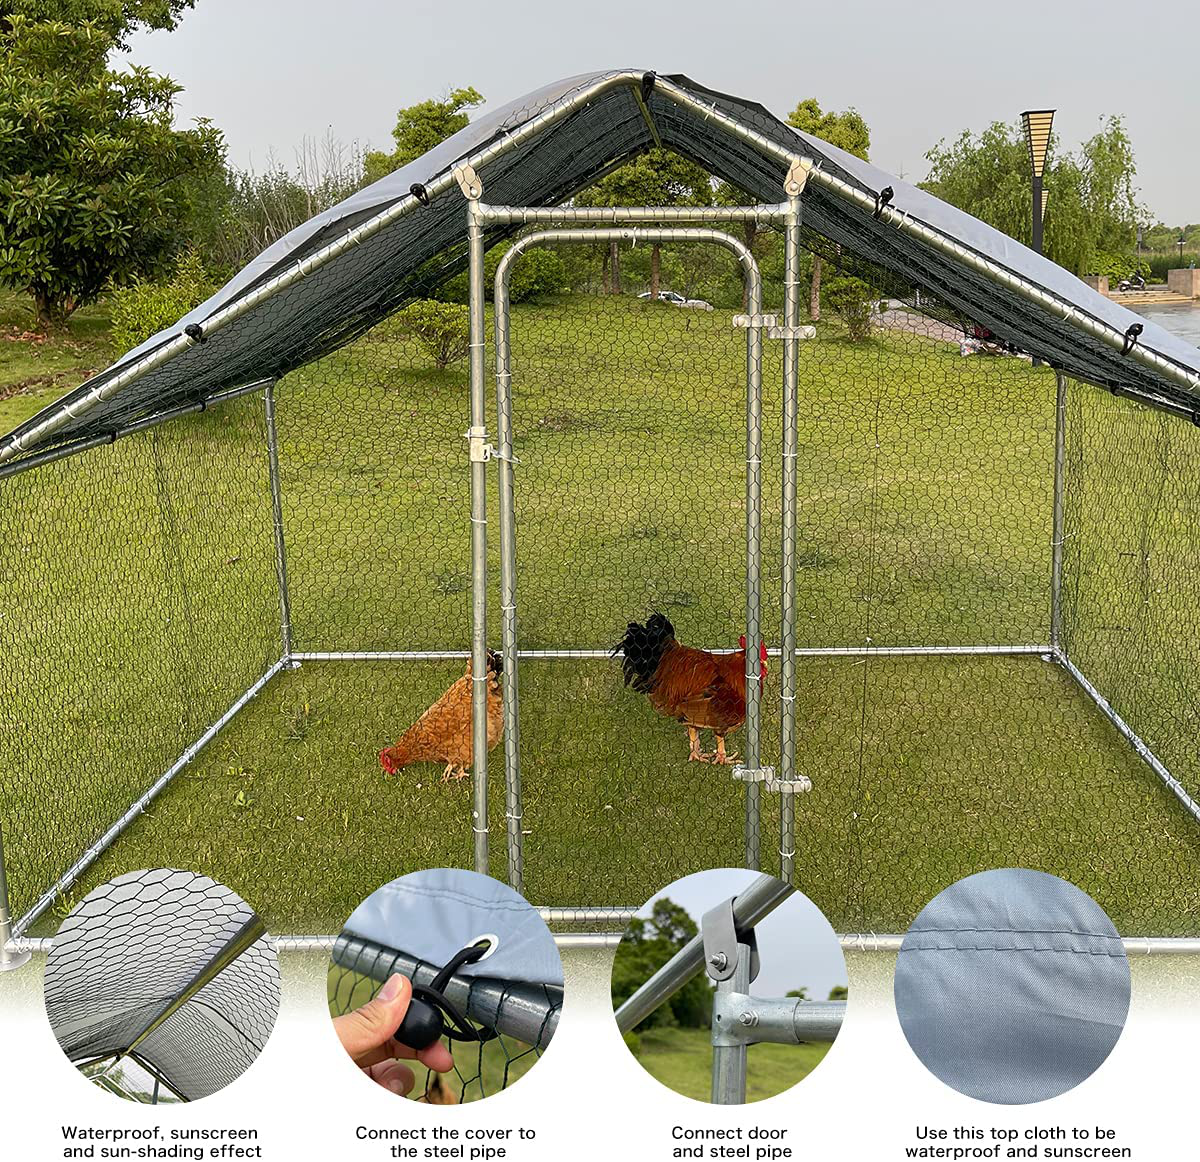 Hiwokk Large Metal Chicken Coop Walk-In Poultry Cage Chicken Run Dog Kennel Chicken Pen Spire Shaped Coop with Waterproof and Anti-Ultraviolet Cover for Backyard Farm Use(9.8'L X 6.6'W X 6.4'H)